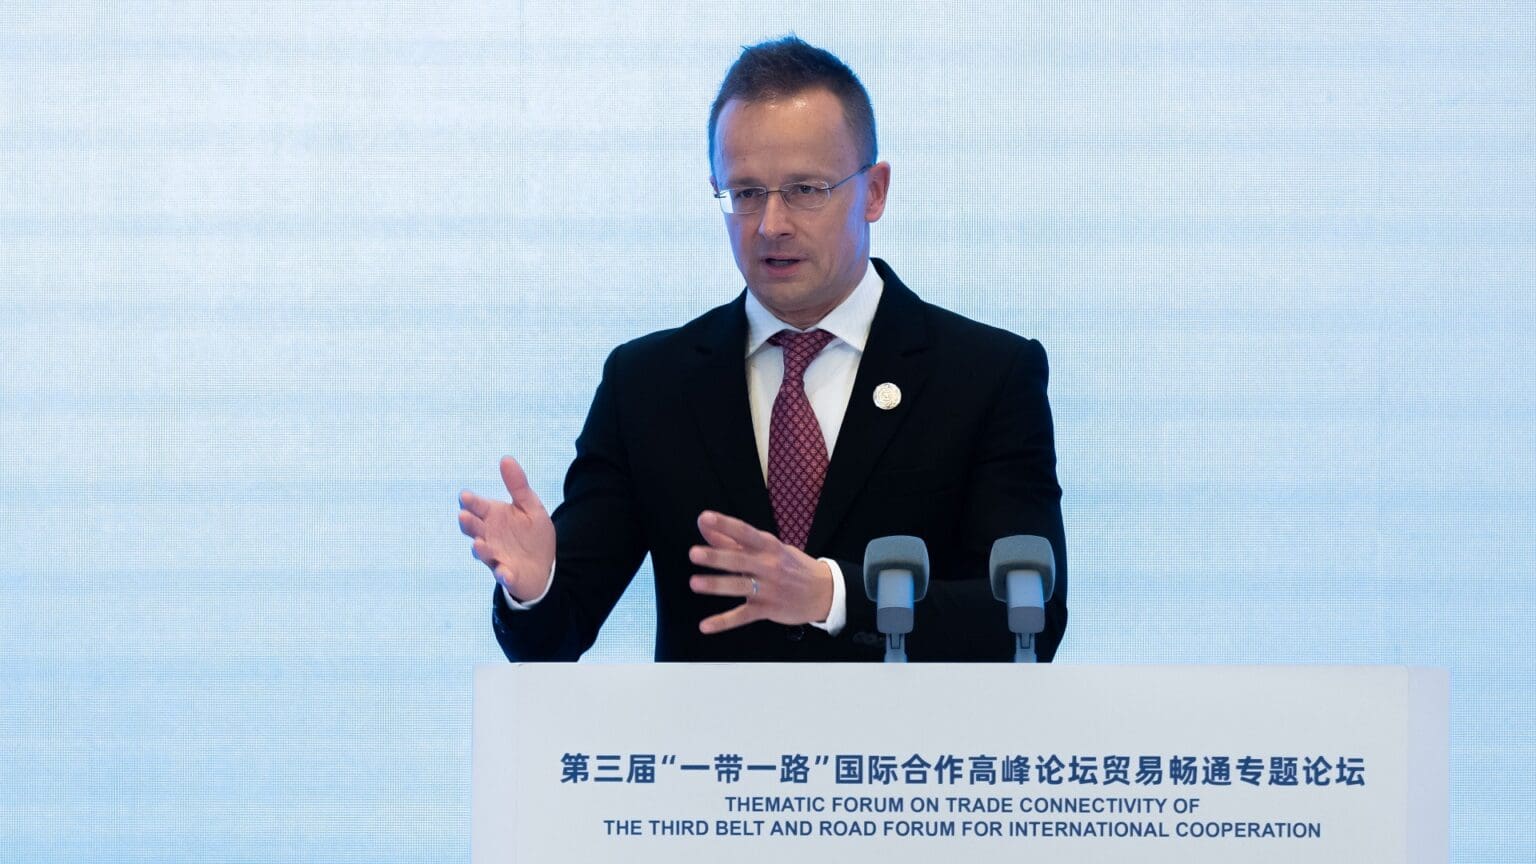 Szijjártó: Attempts to Sever Ties Between Eastern and Western Economies Are Risky